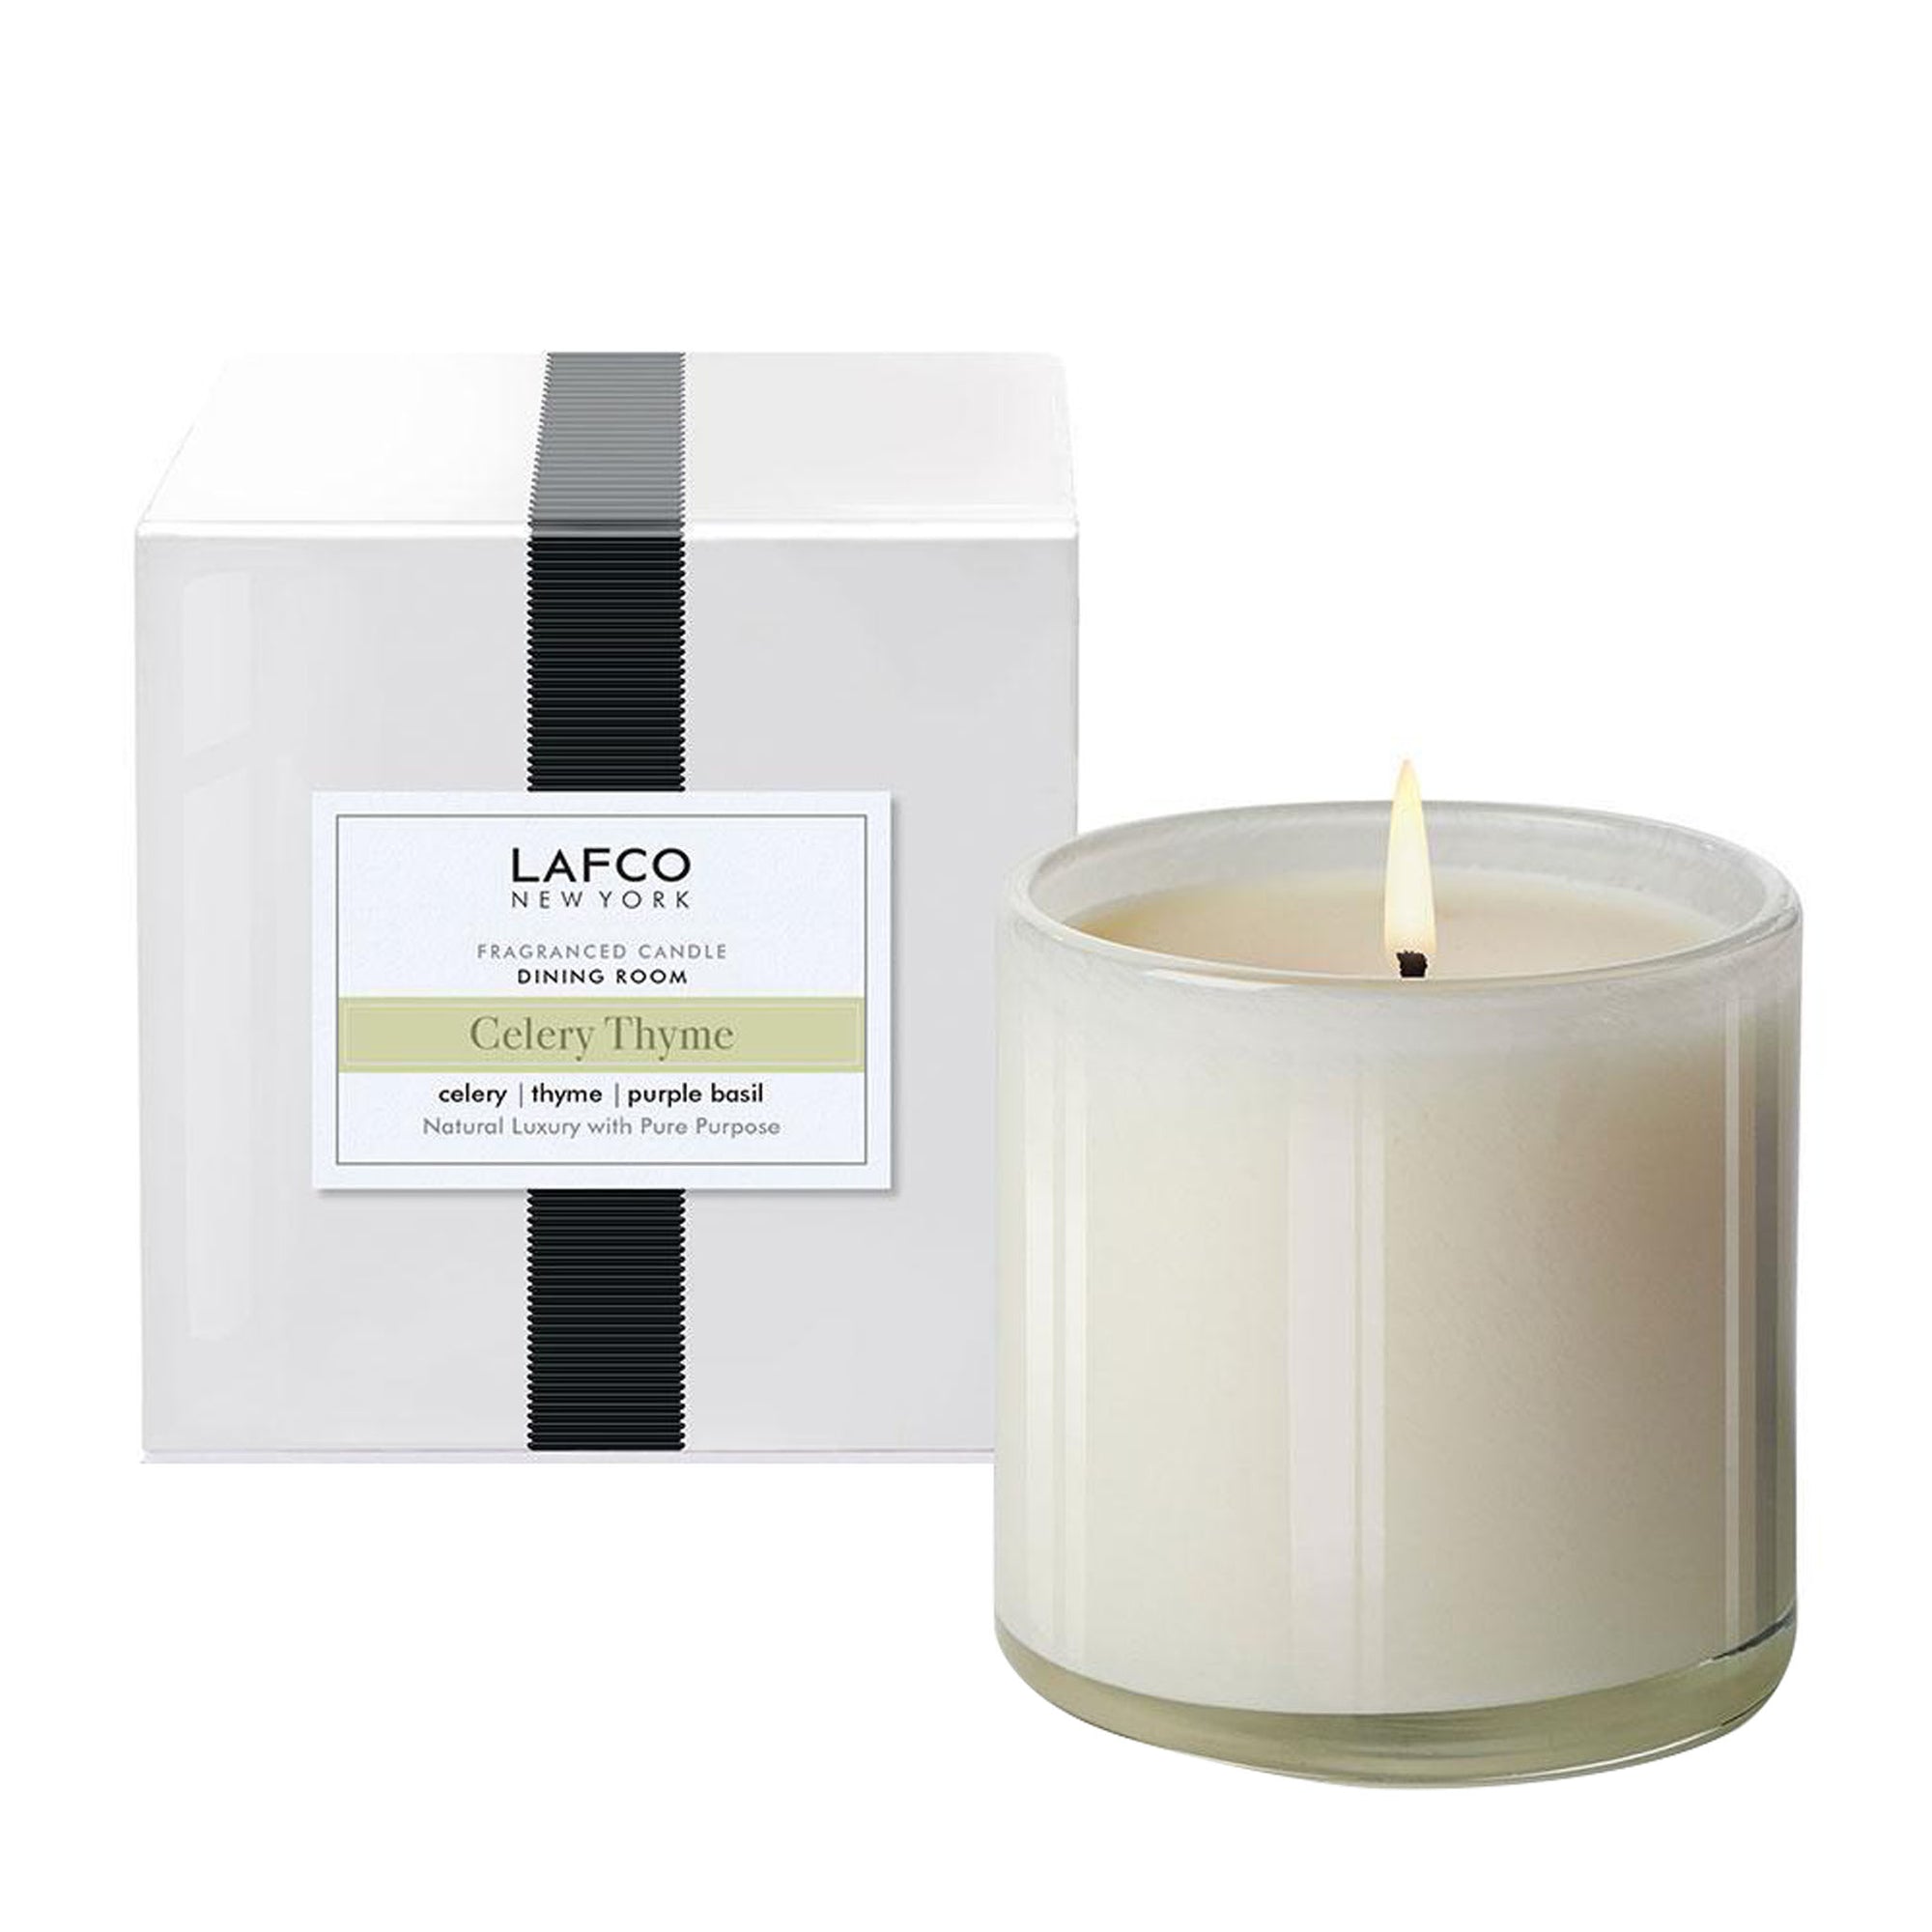 Lafco Dining Room | Celery Thyme Candle